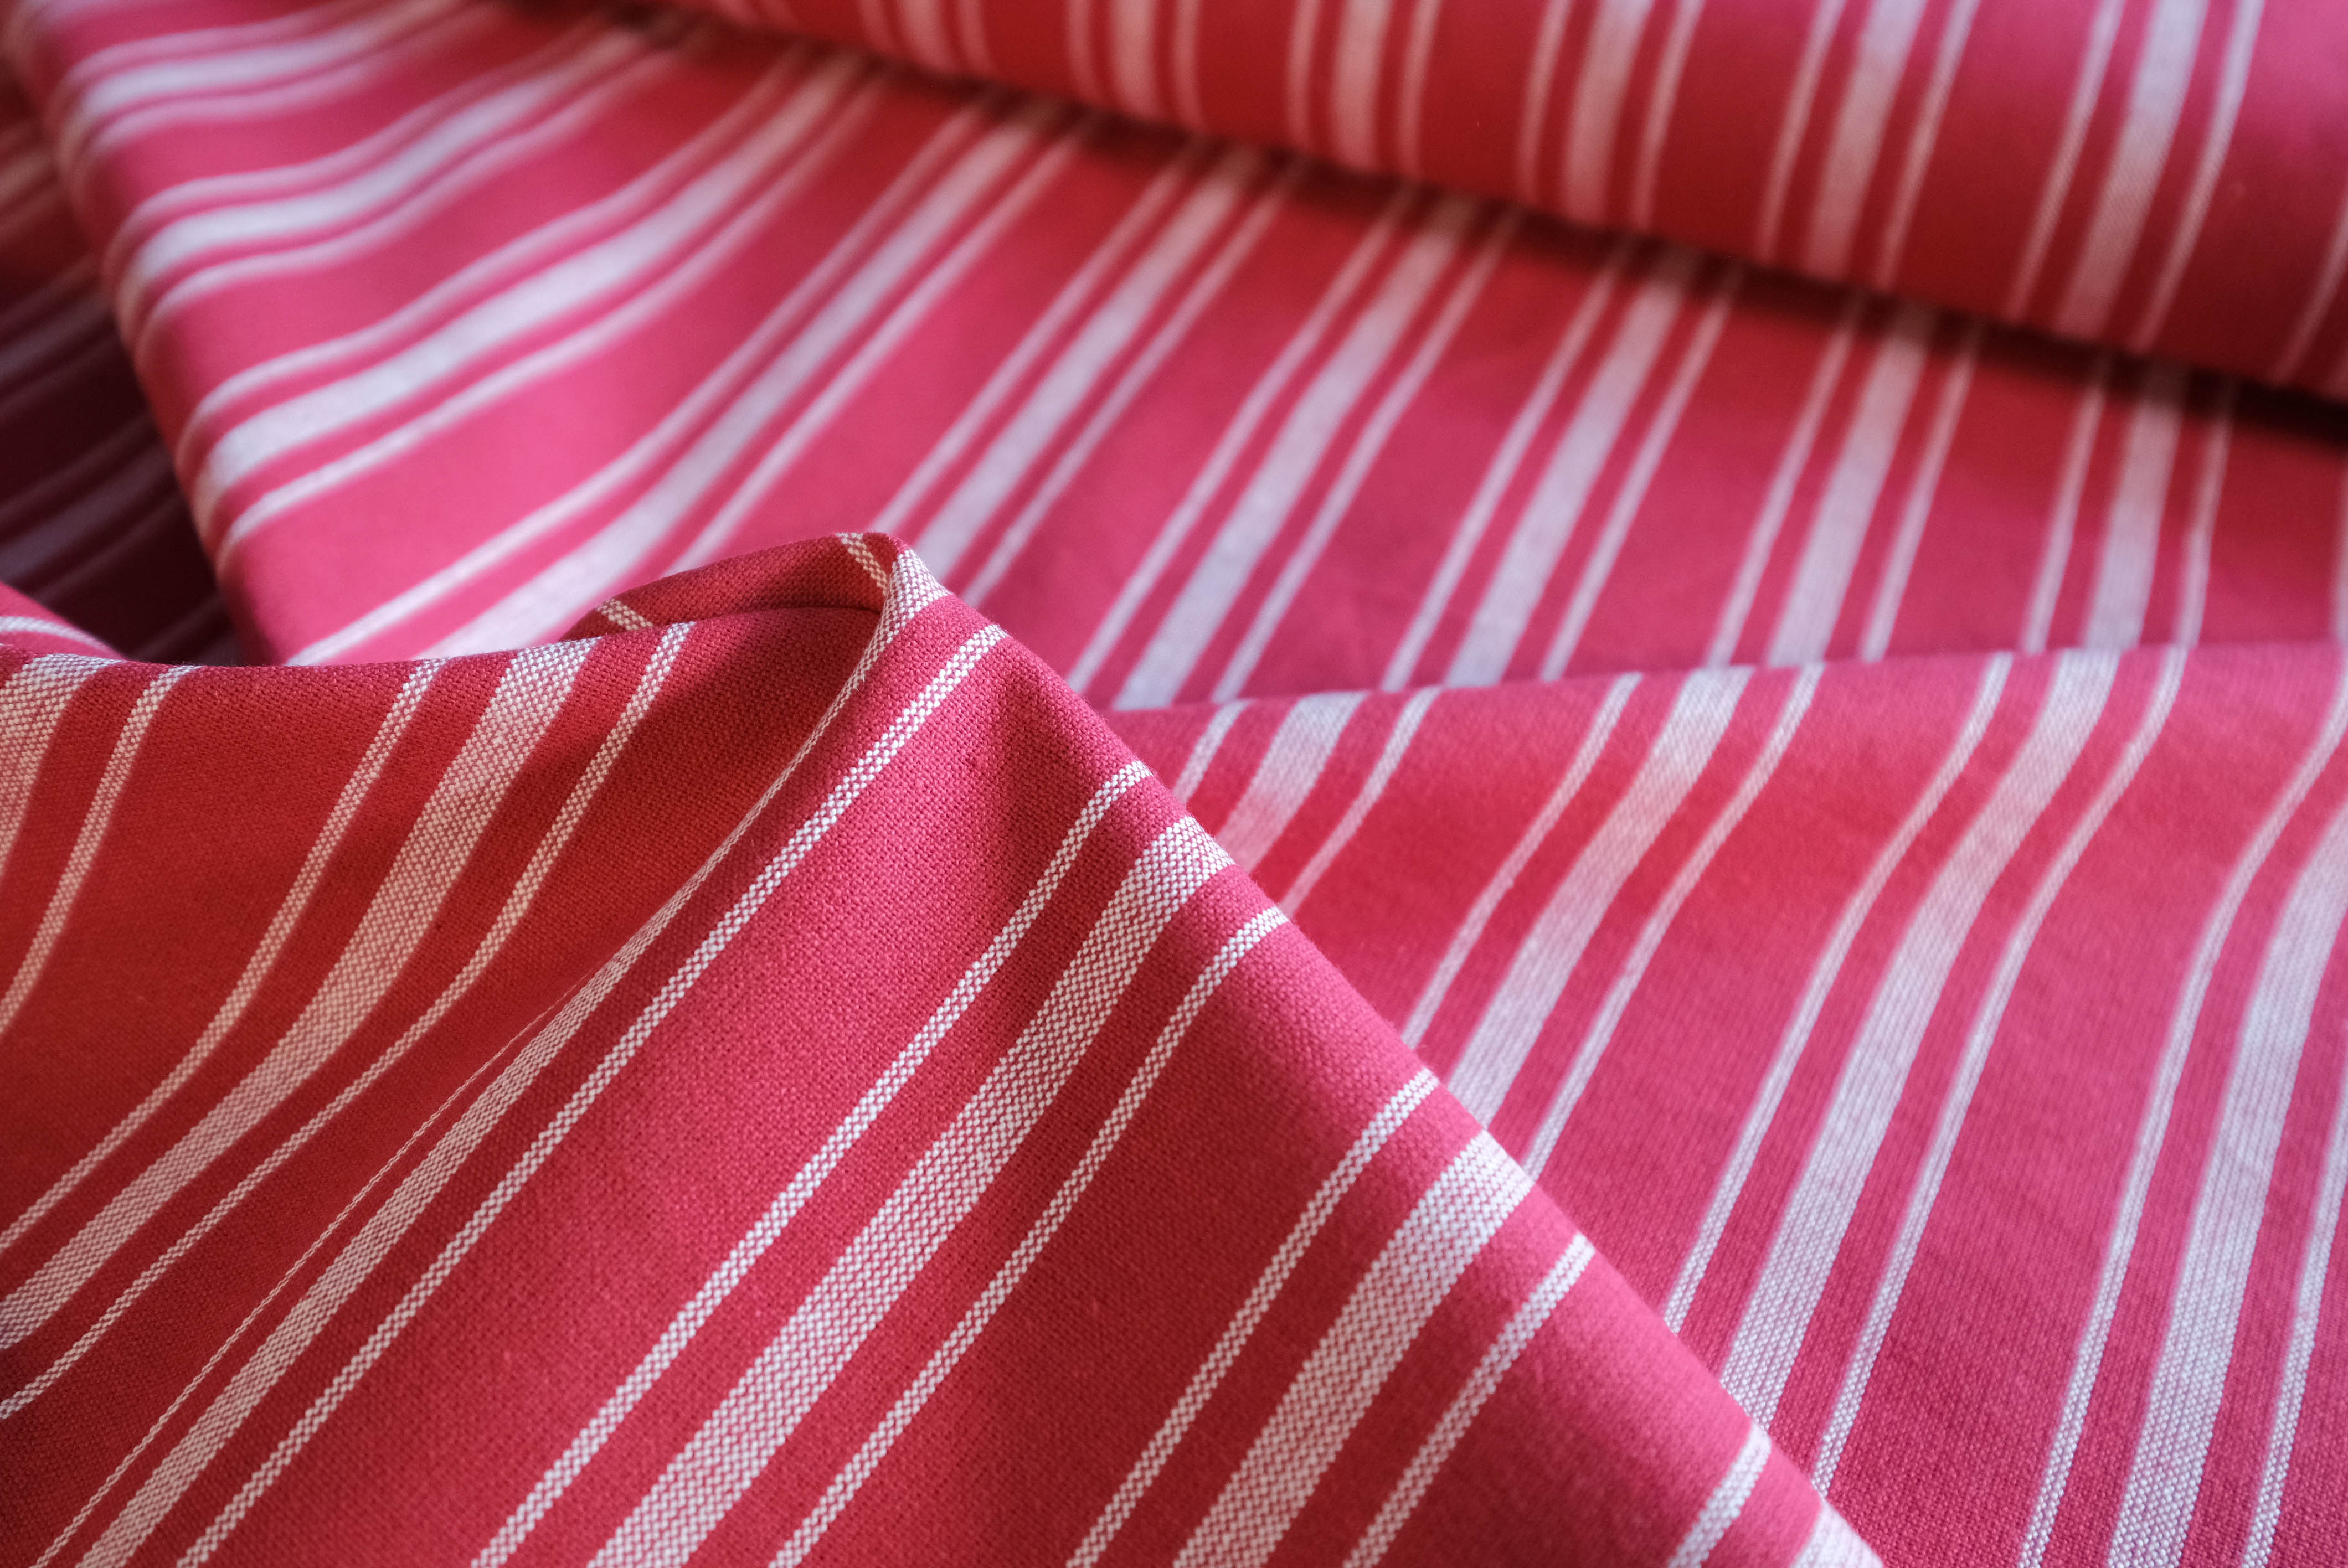 Striped cotton- red and white